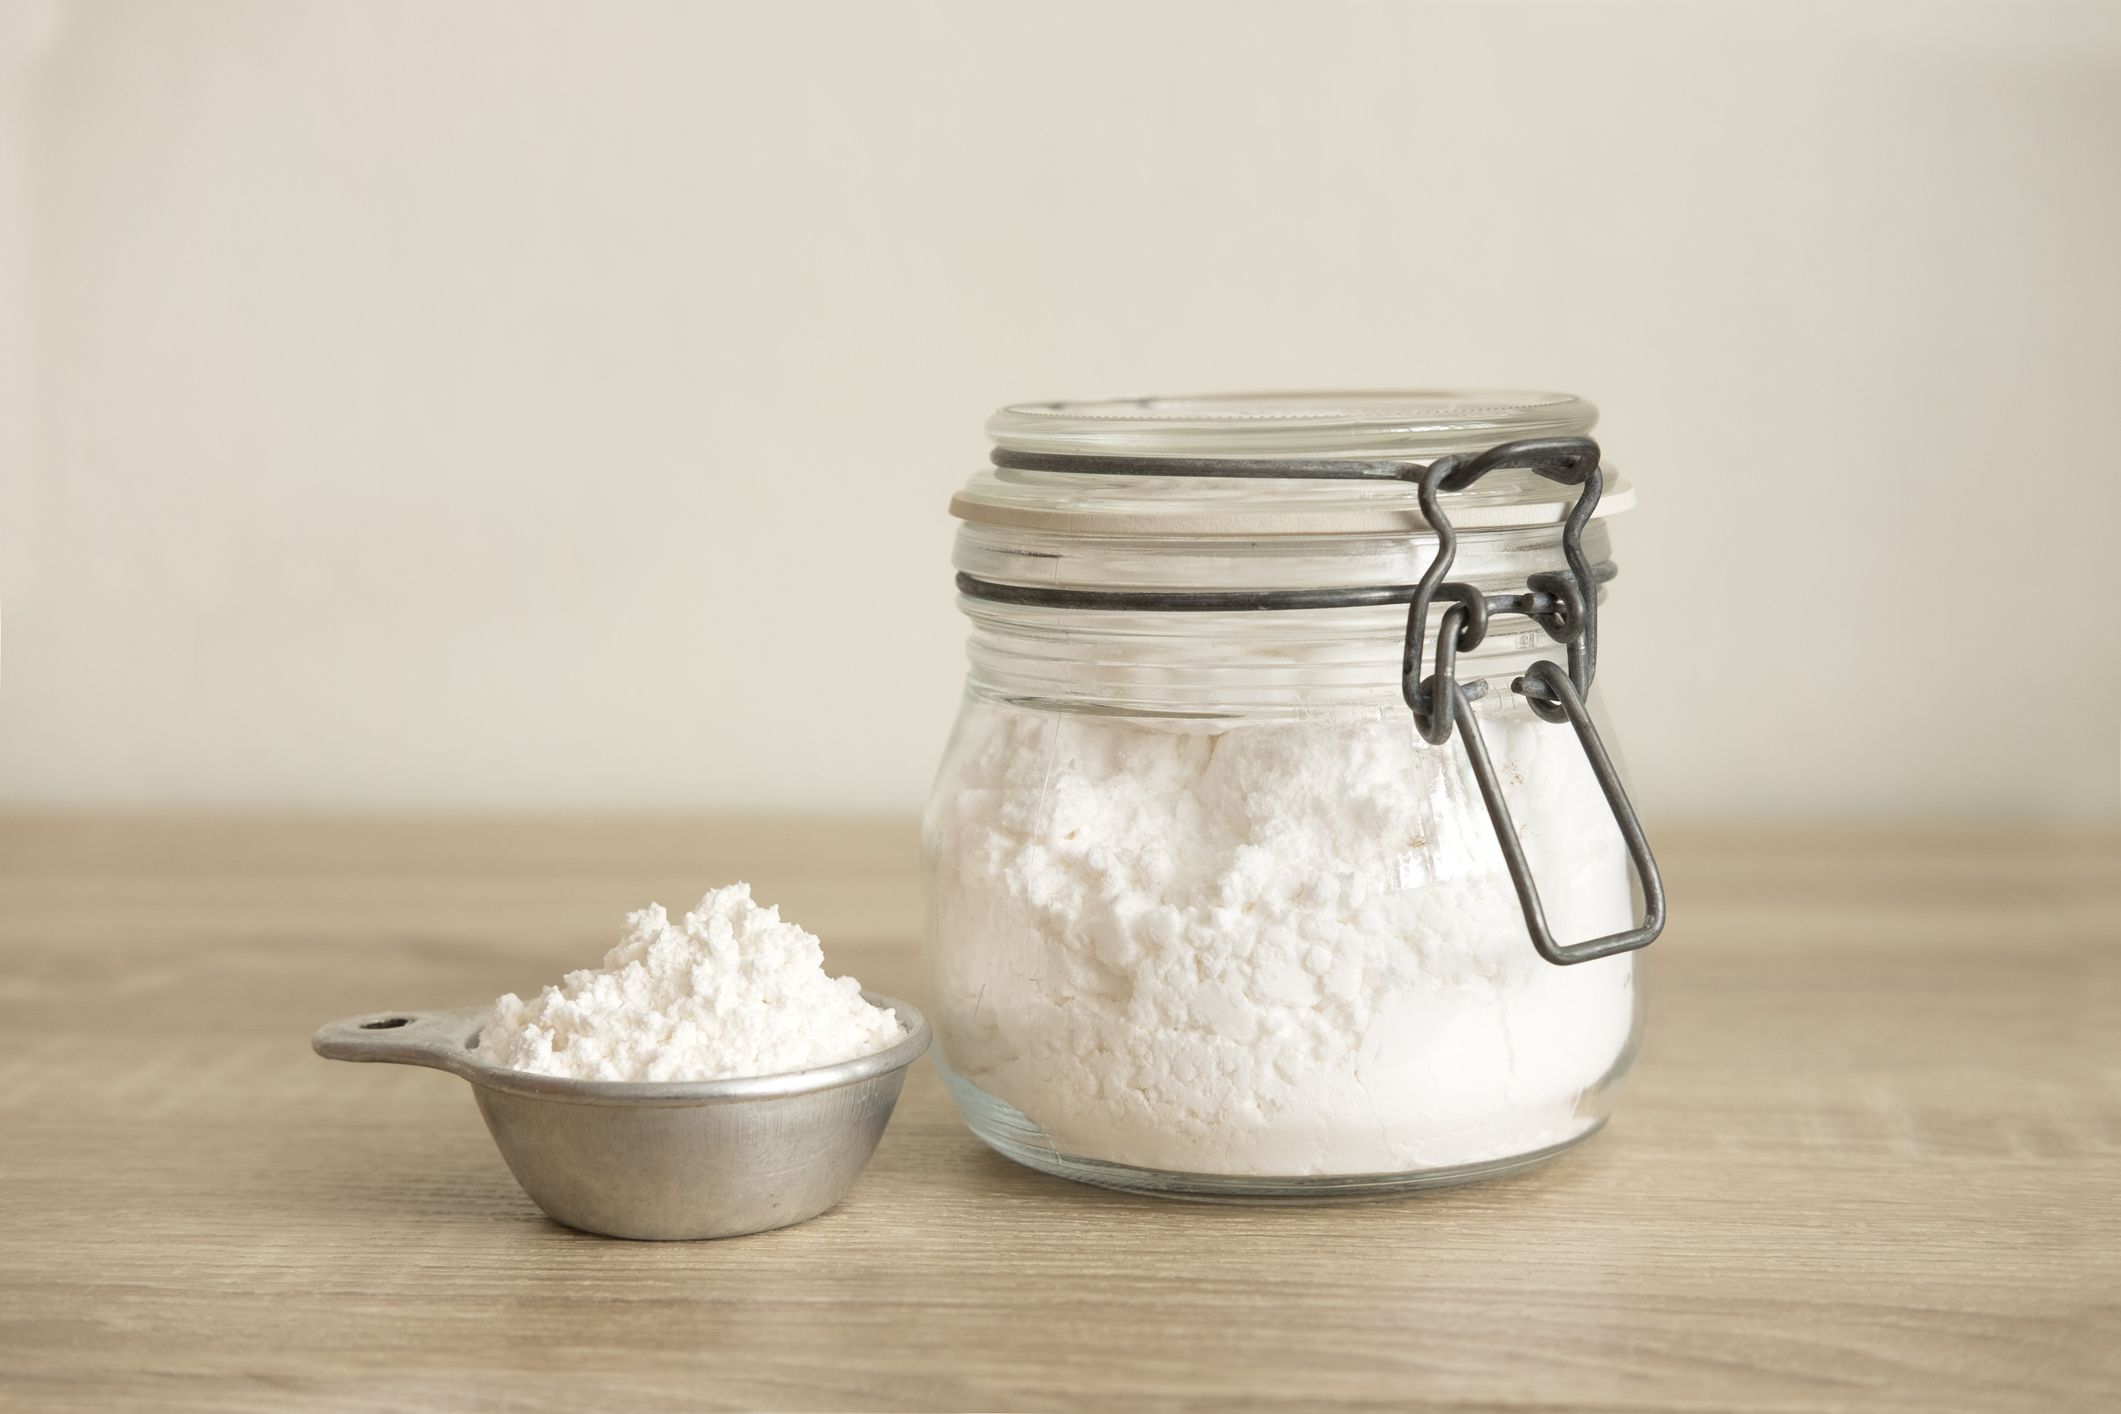 The Difference Between Plain Flour And Self-Raising Flour